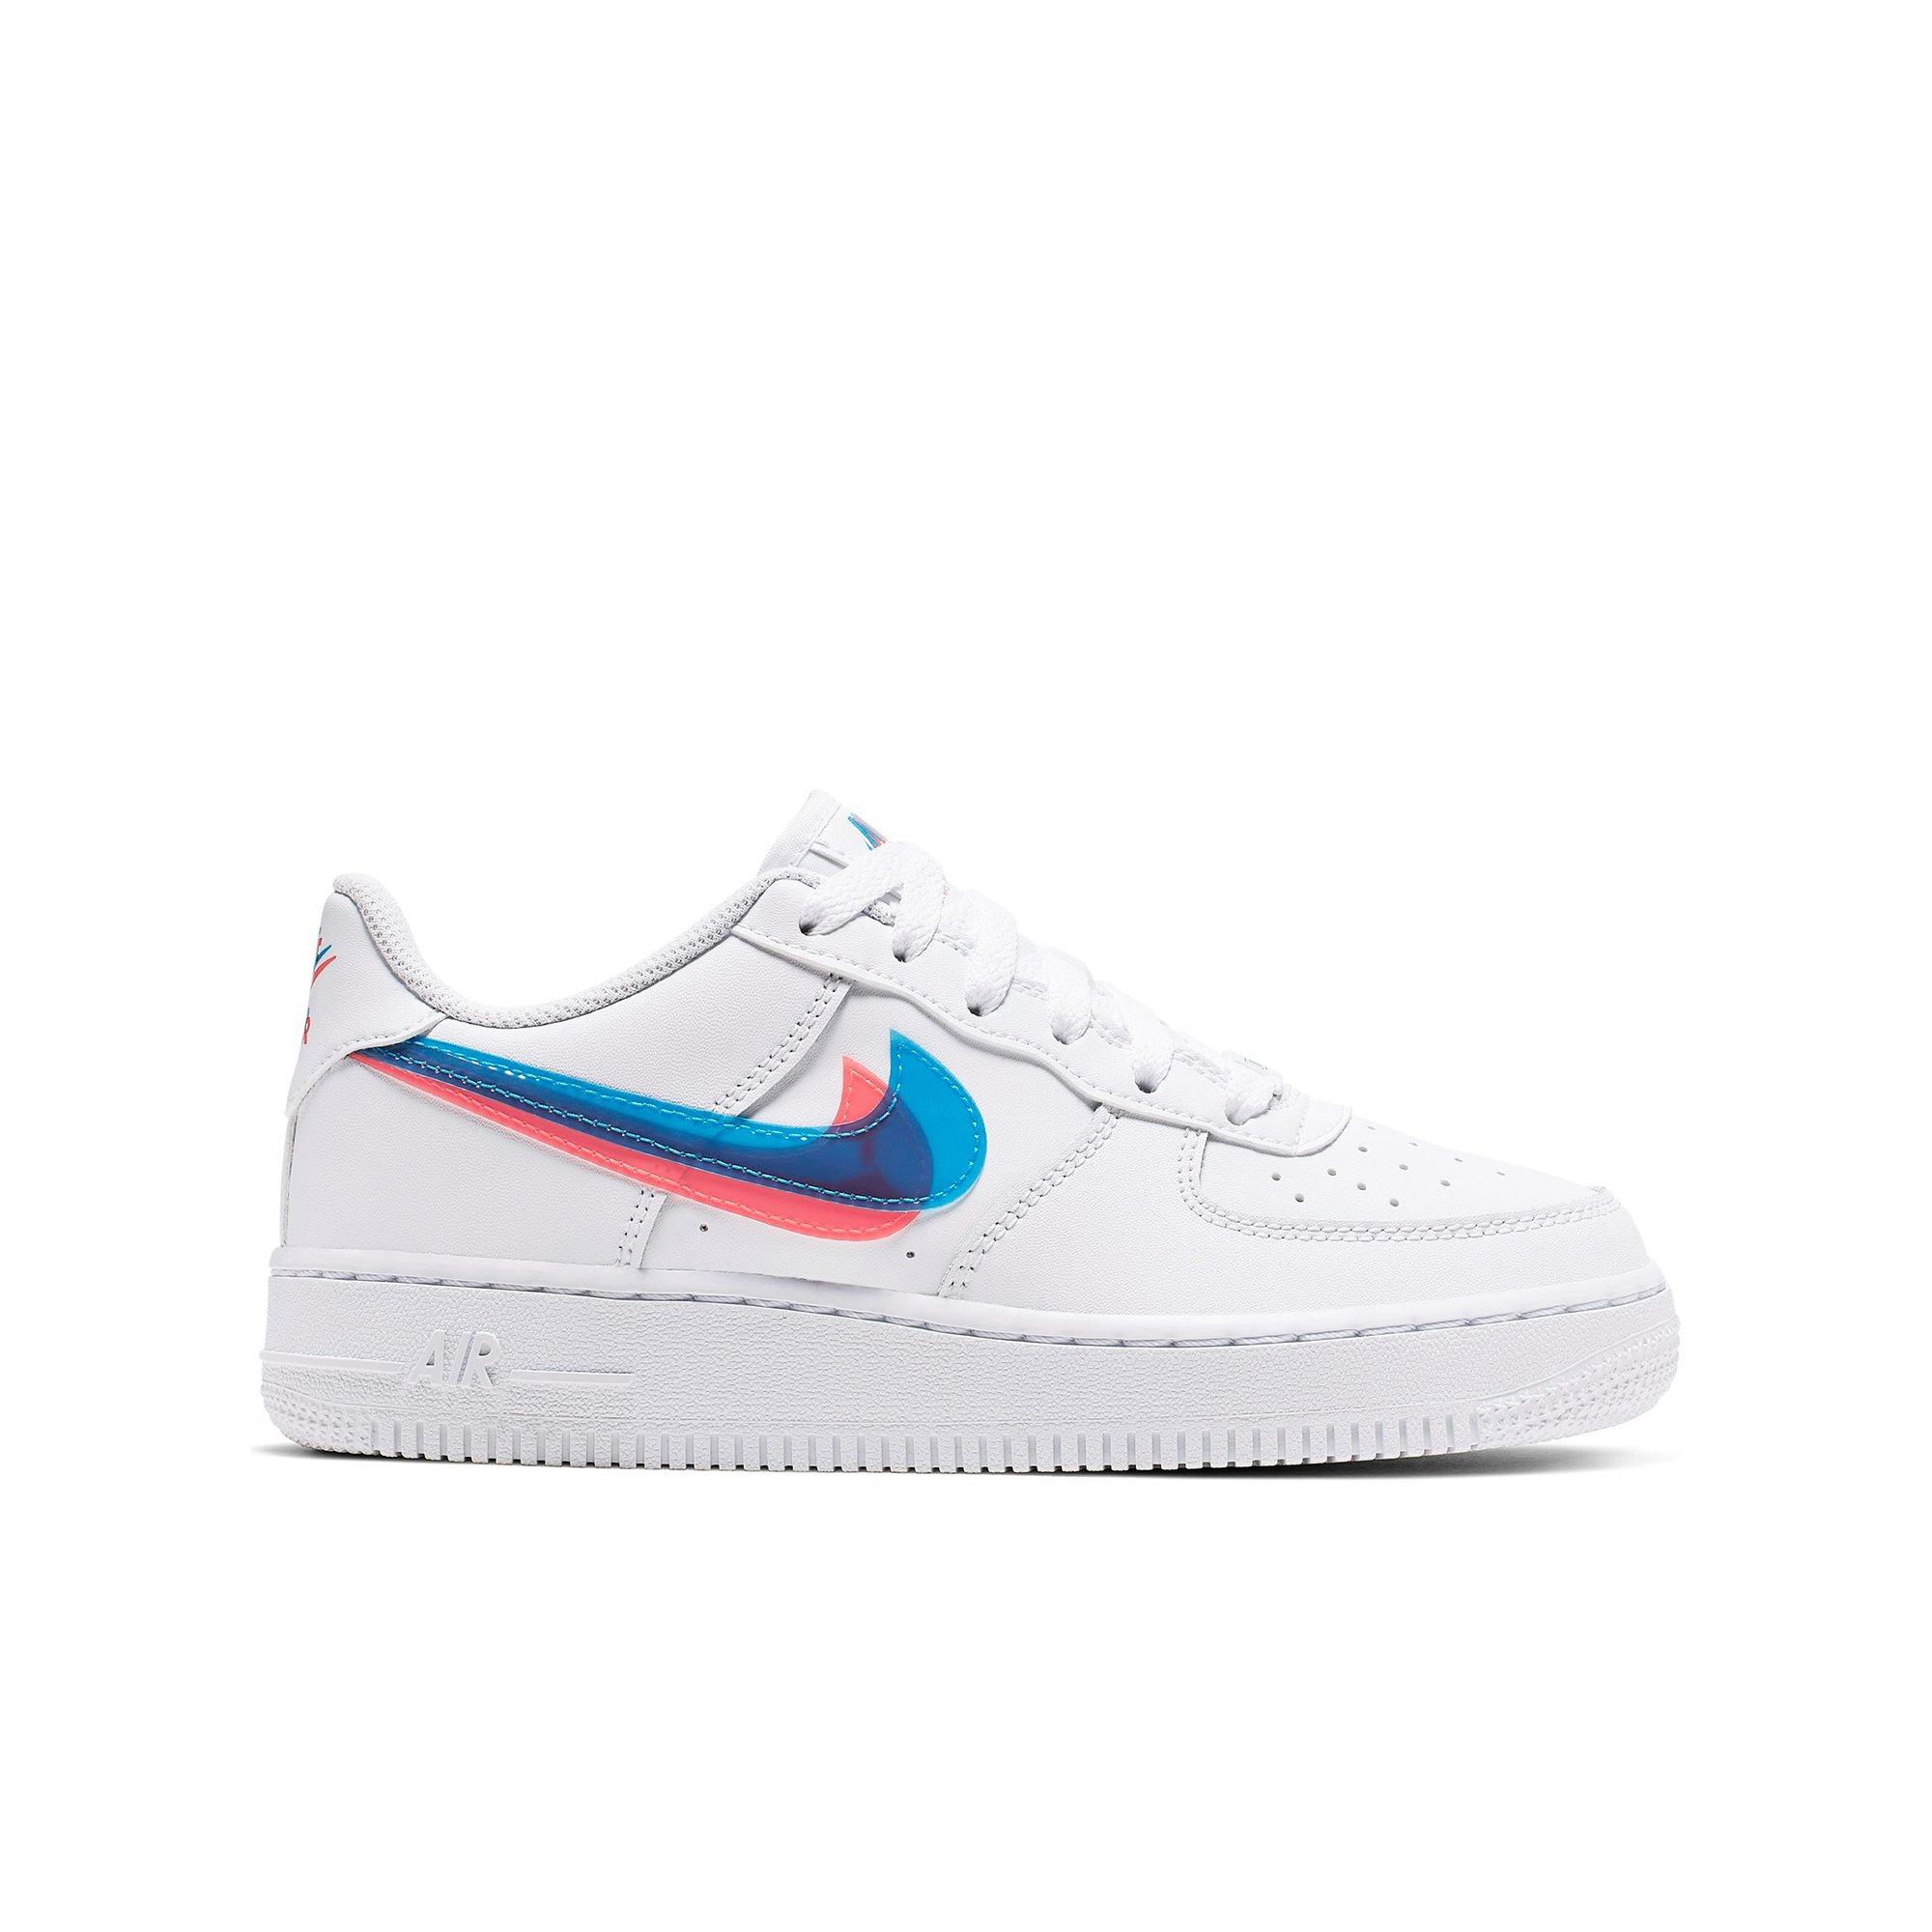 junior size 3 air force 1